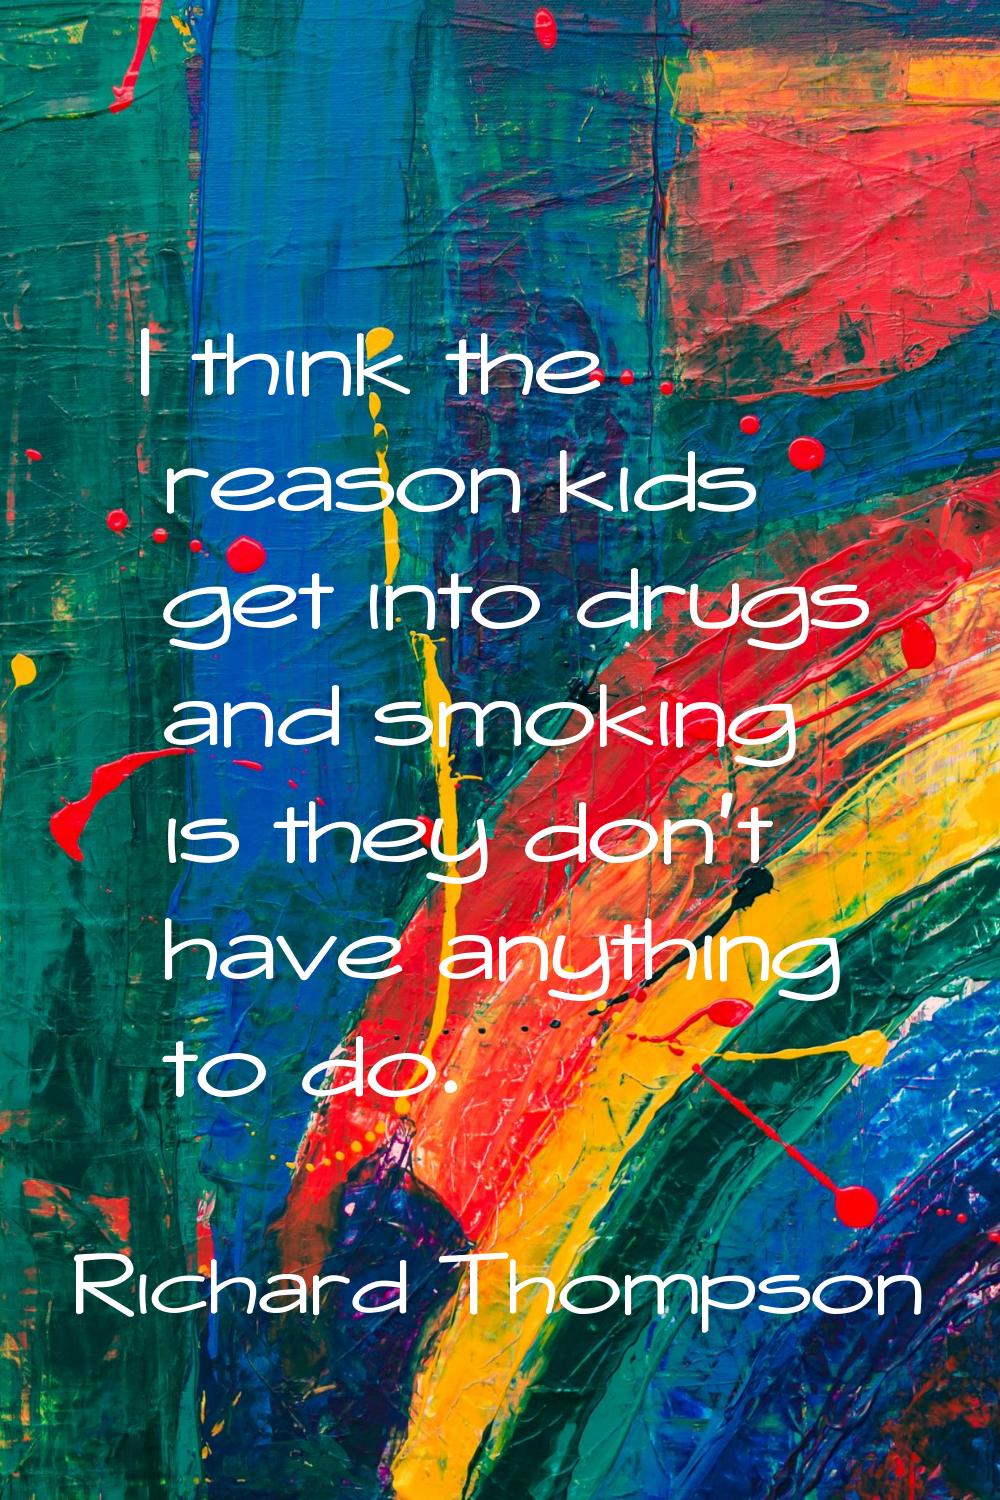 I think the reason kids get into drugs and smoking is they don't have anything to do.